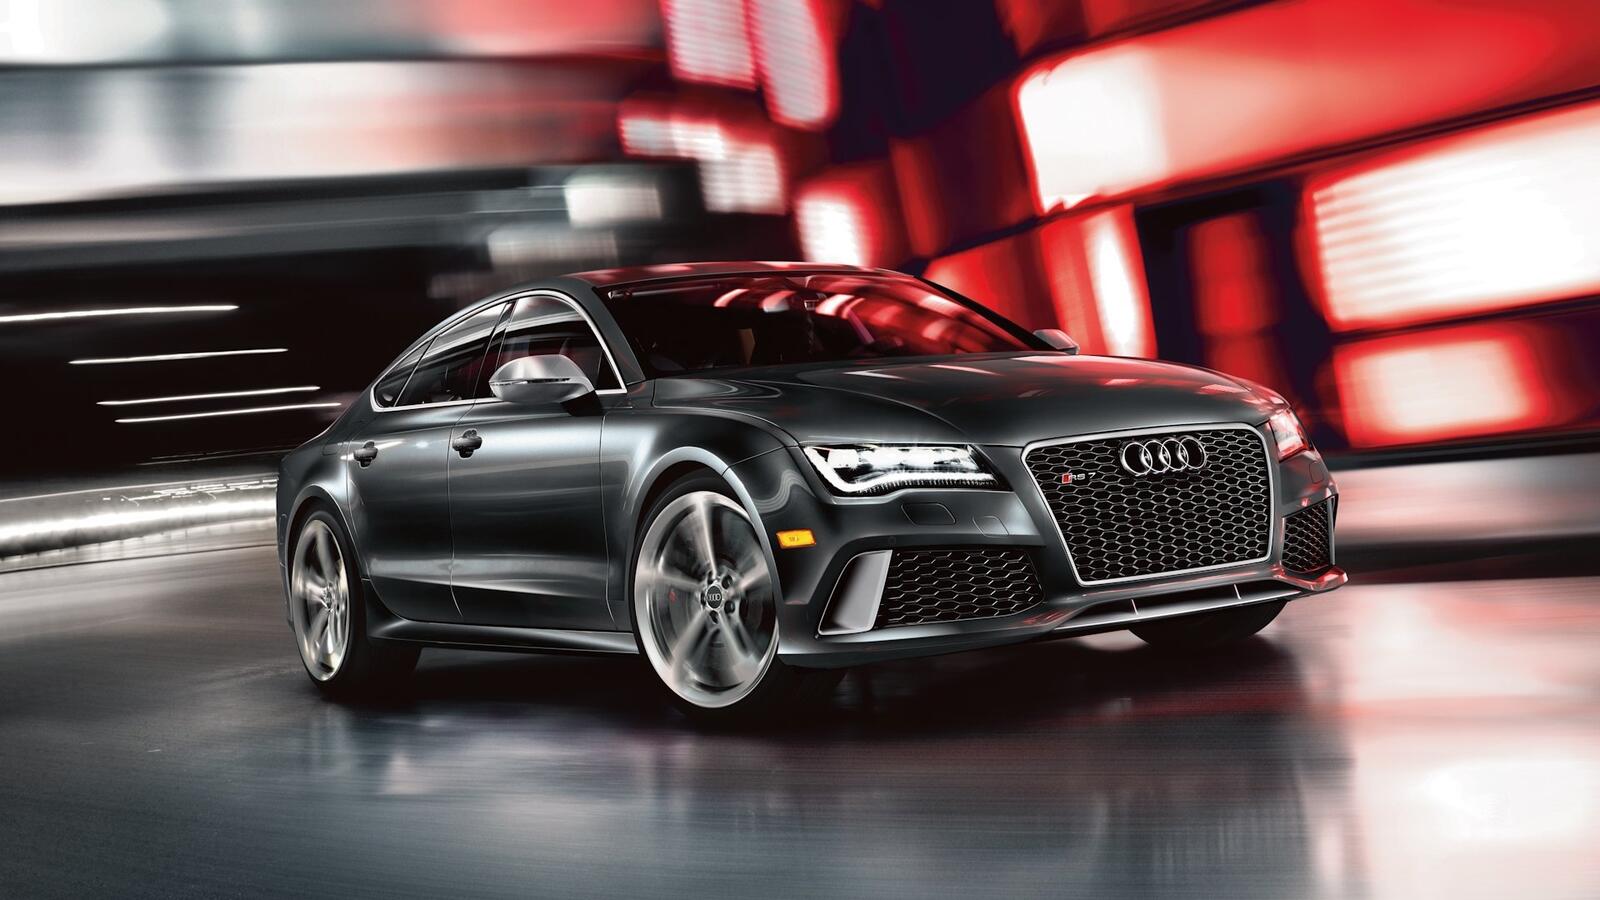 Wallpapers audi rs7 black side view on the desktop